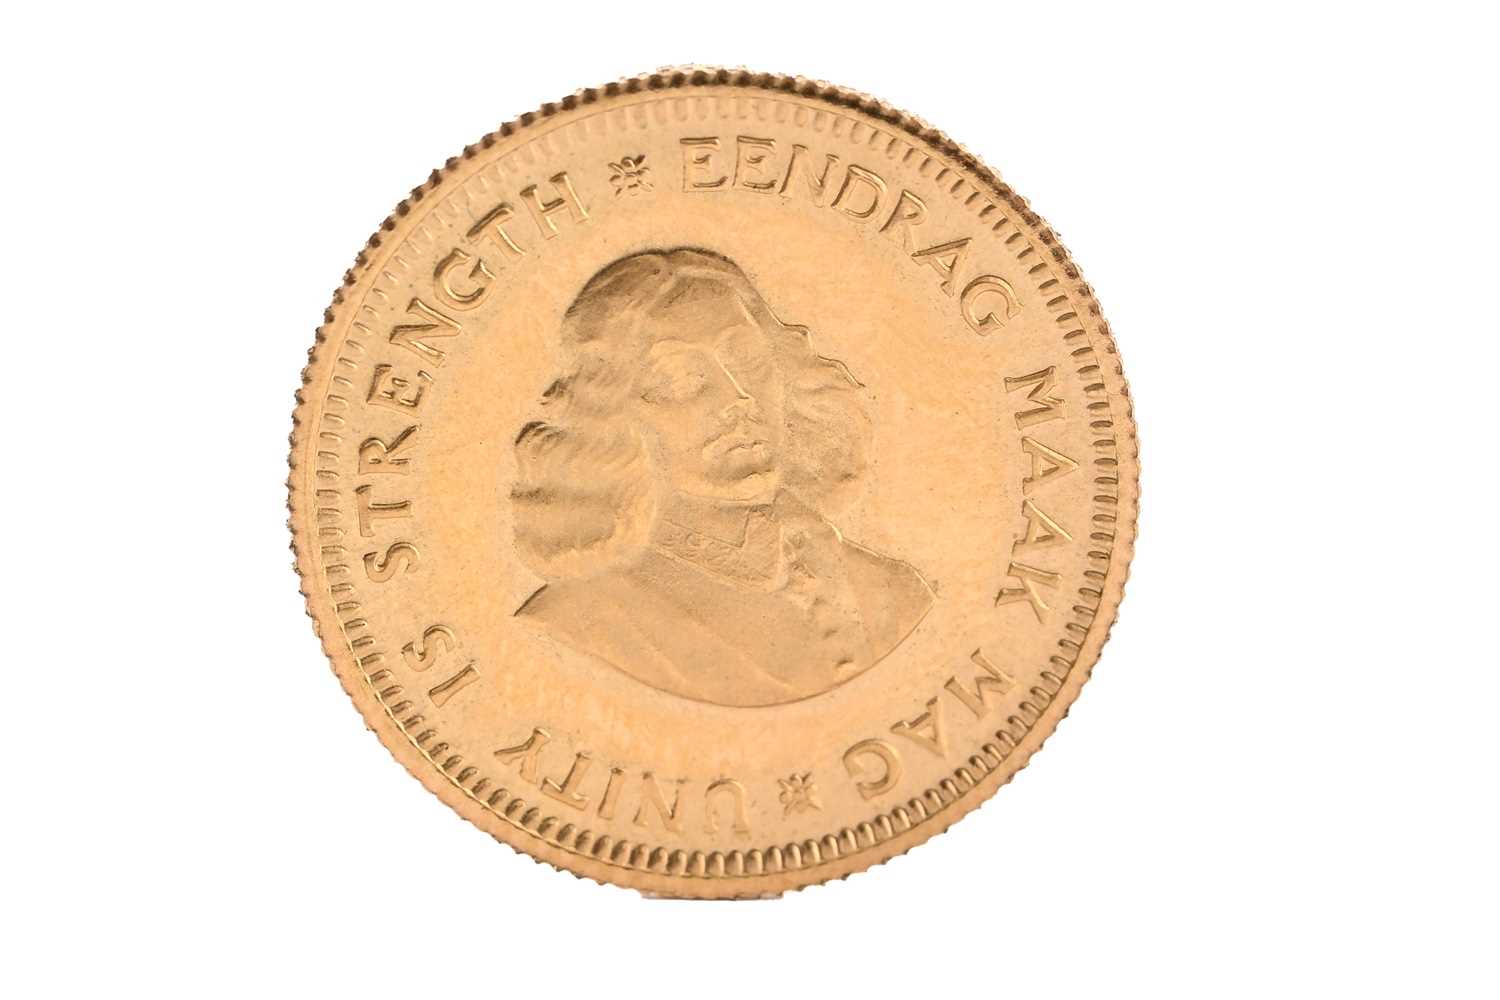 GOLD 1 RAND COIN, - Image 2 of 4